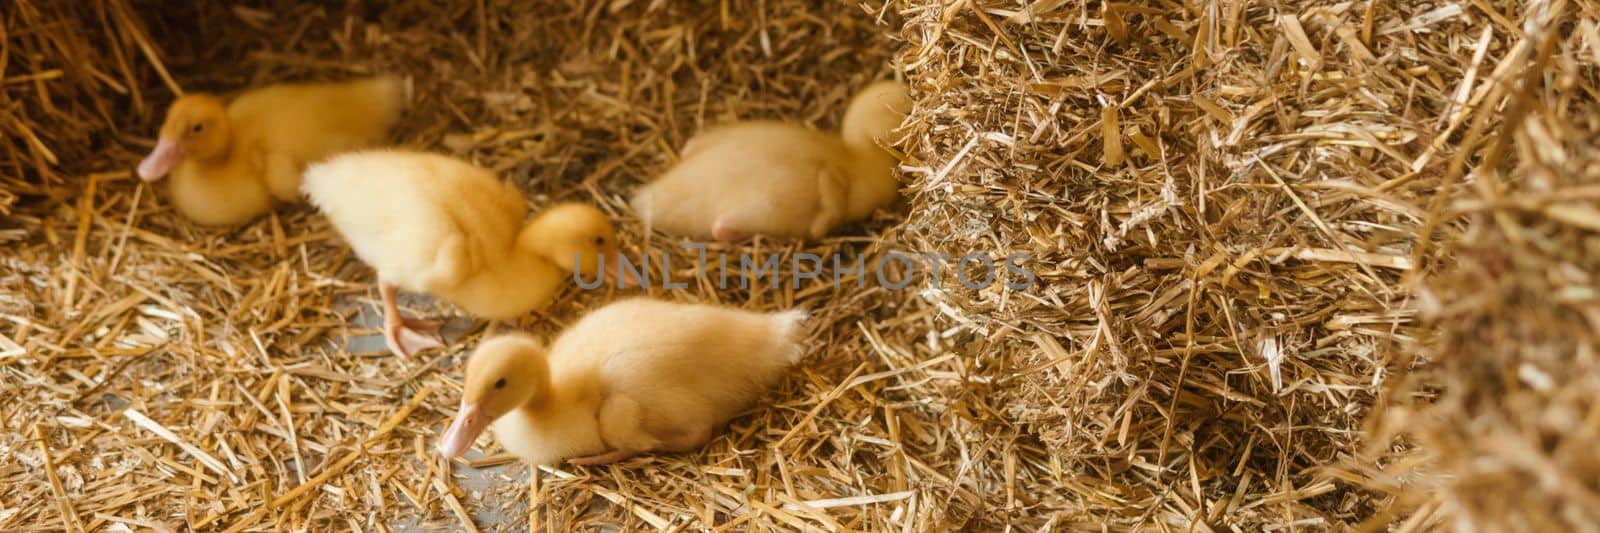 Live yellow ducks next to fresh hay close-up. the concept of raising animals on a farm